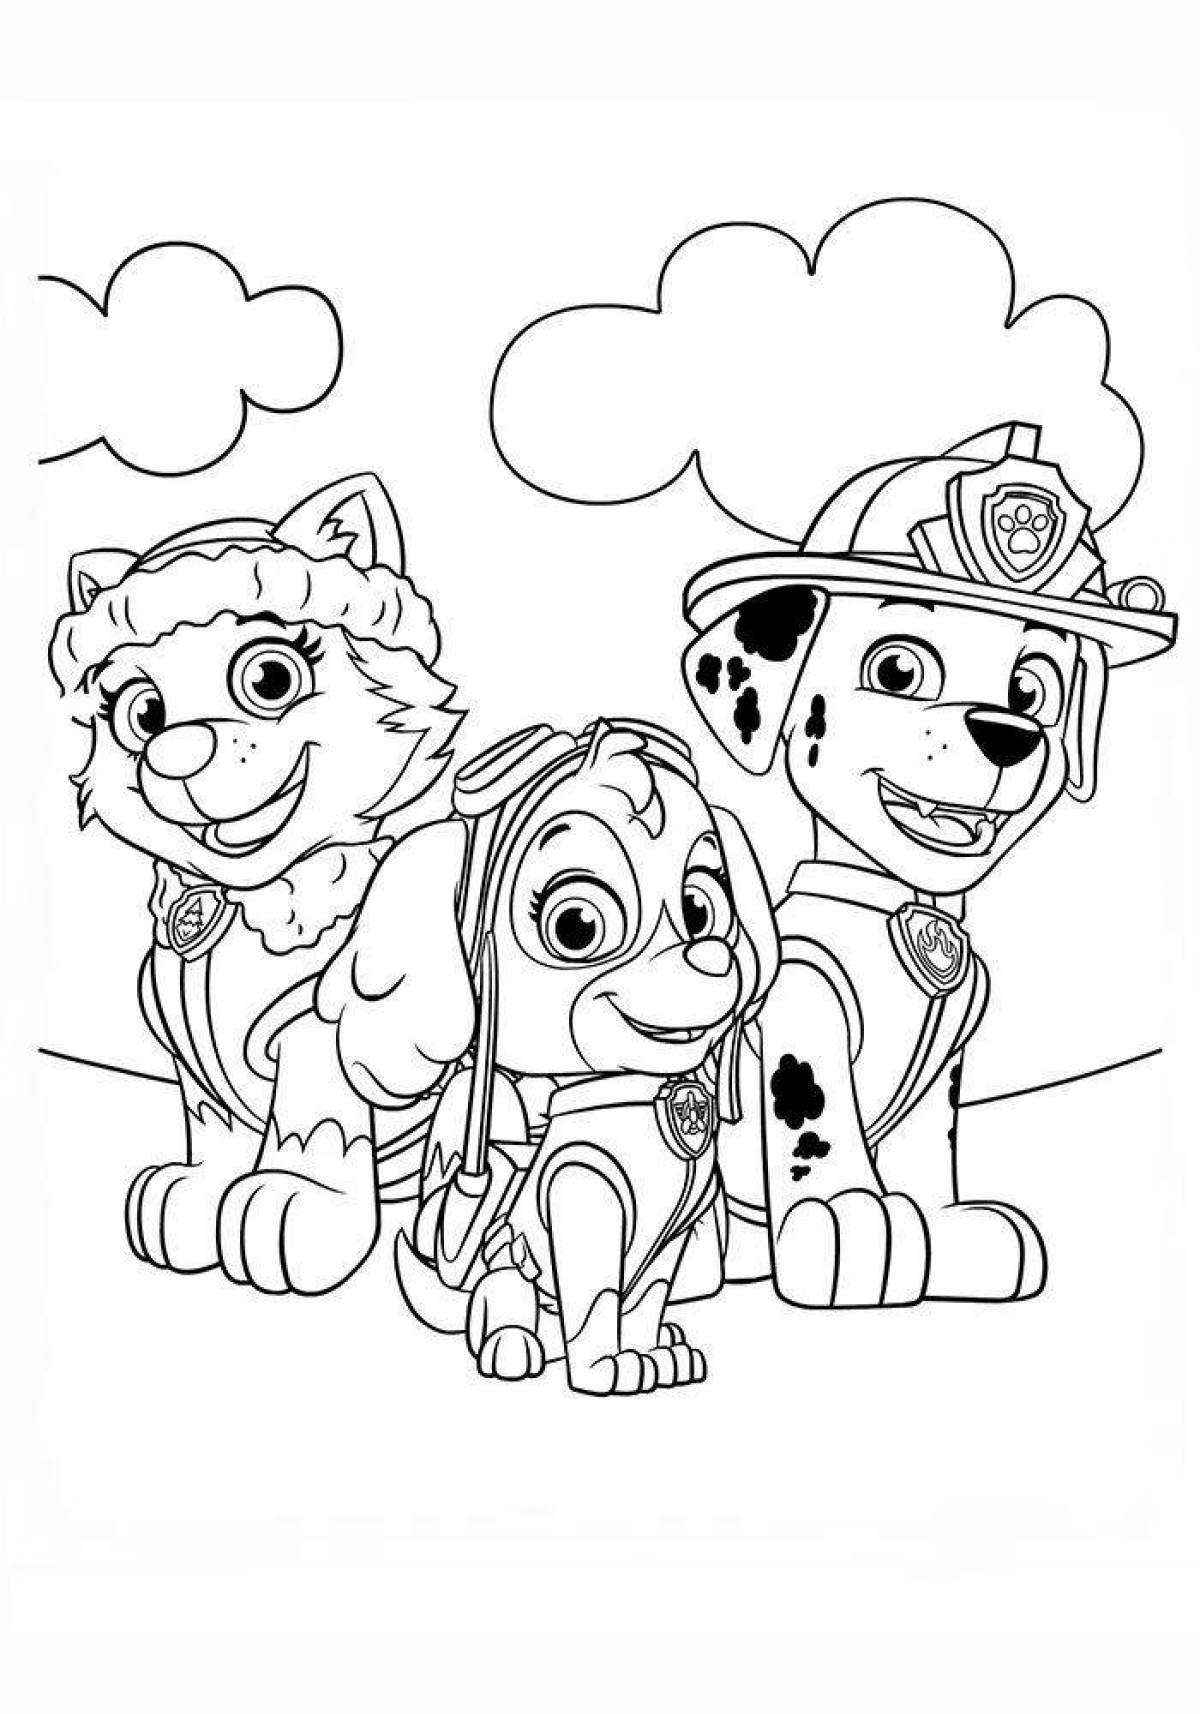 Smiling Skye puppy coloring page